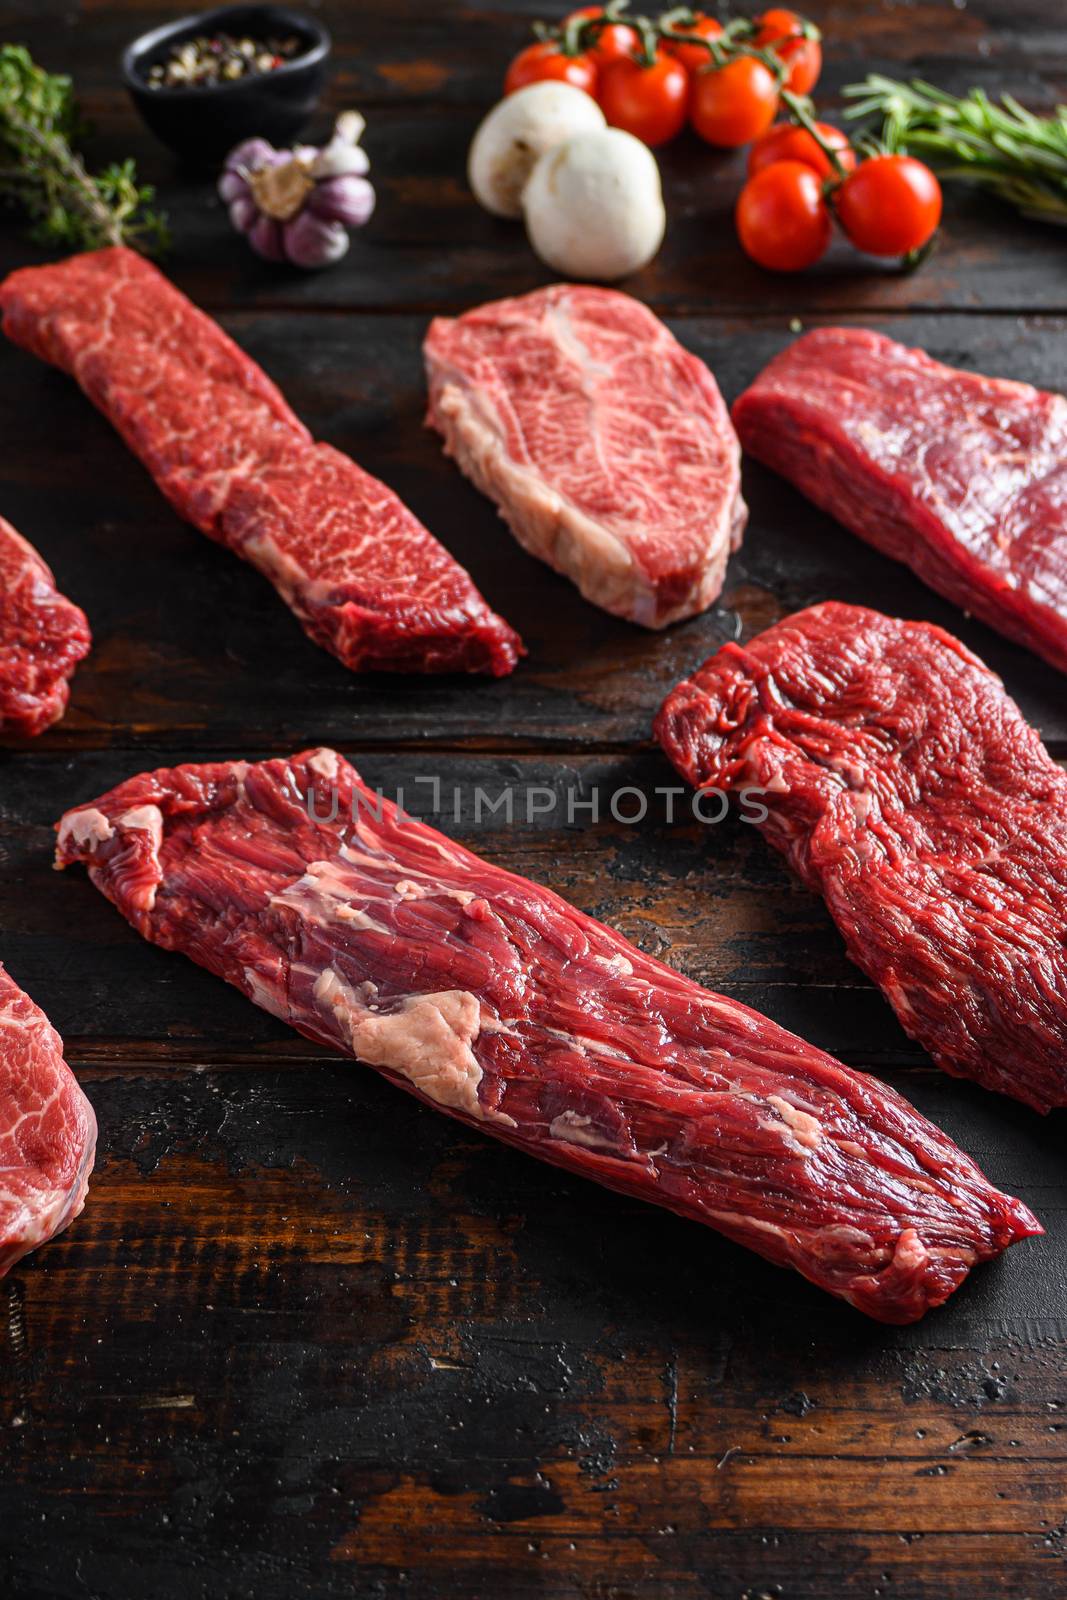 Alternative beef cut machete skirt steak close up in front of other cuts in butchery on old wood table side view selective focus vertical.